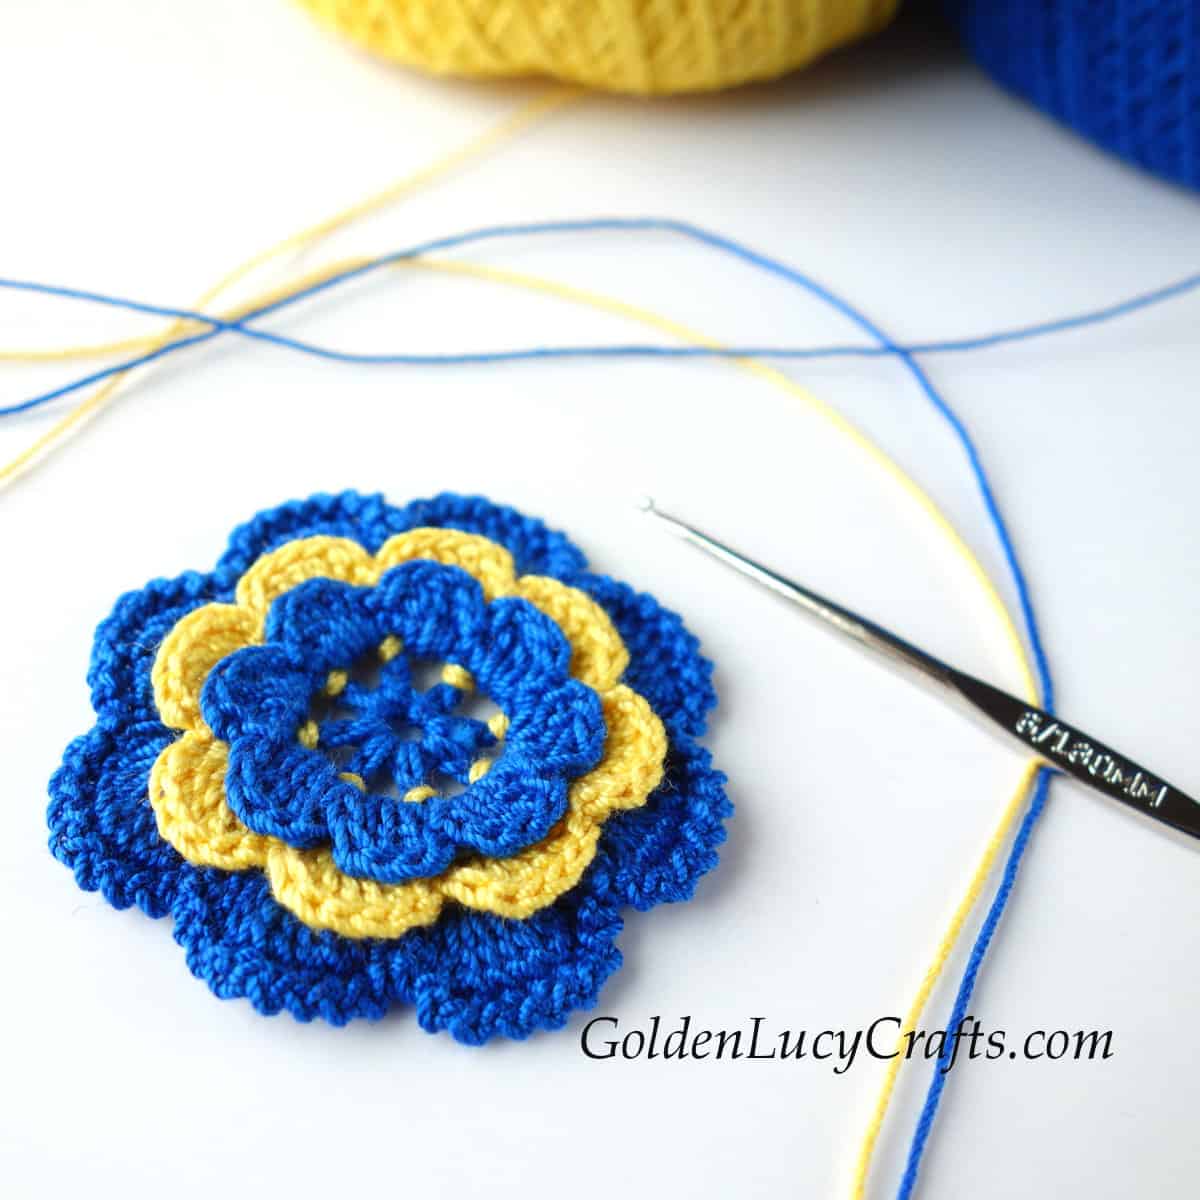 Crochet Irish rose with blue and yellow petals.